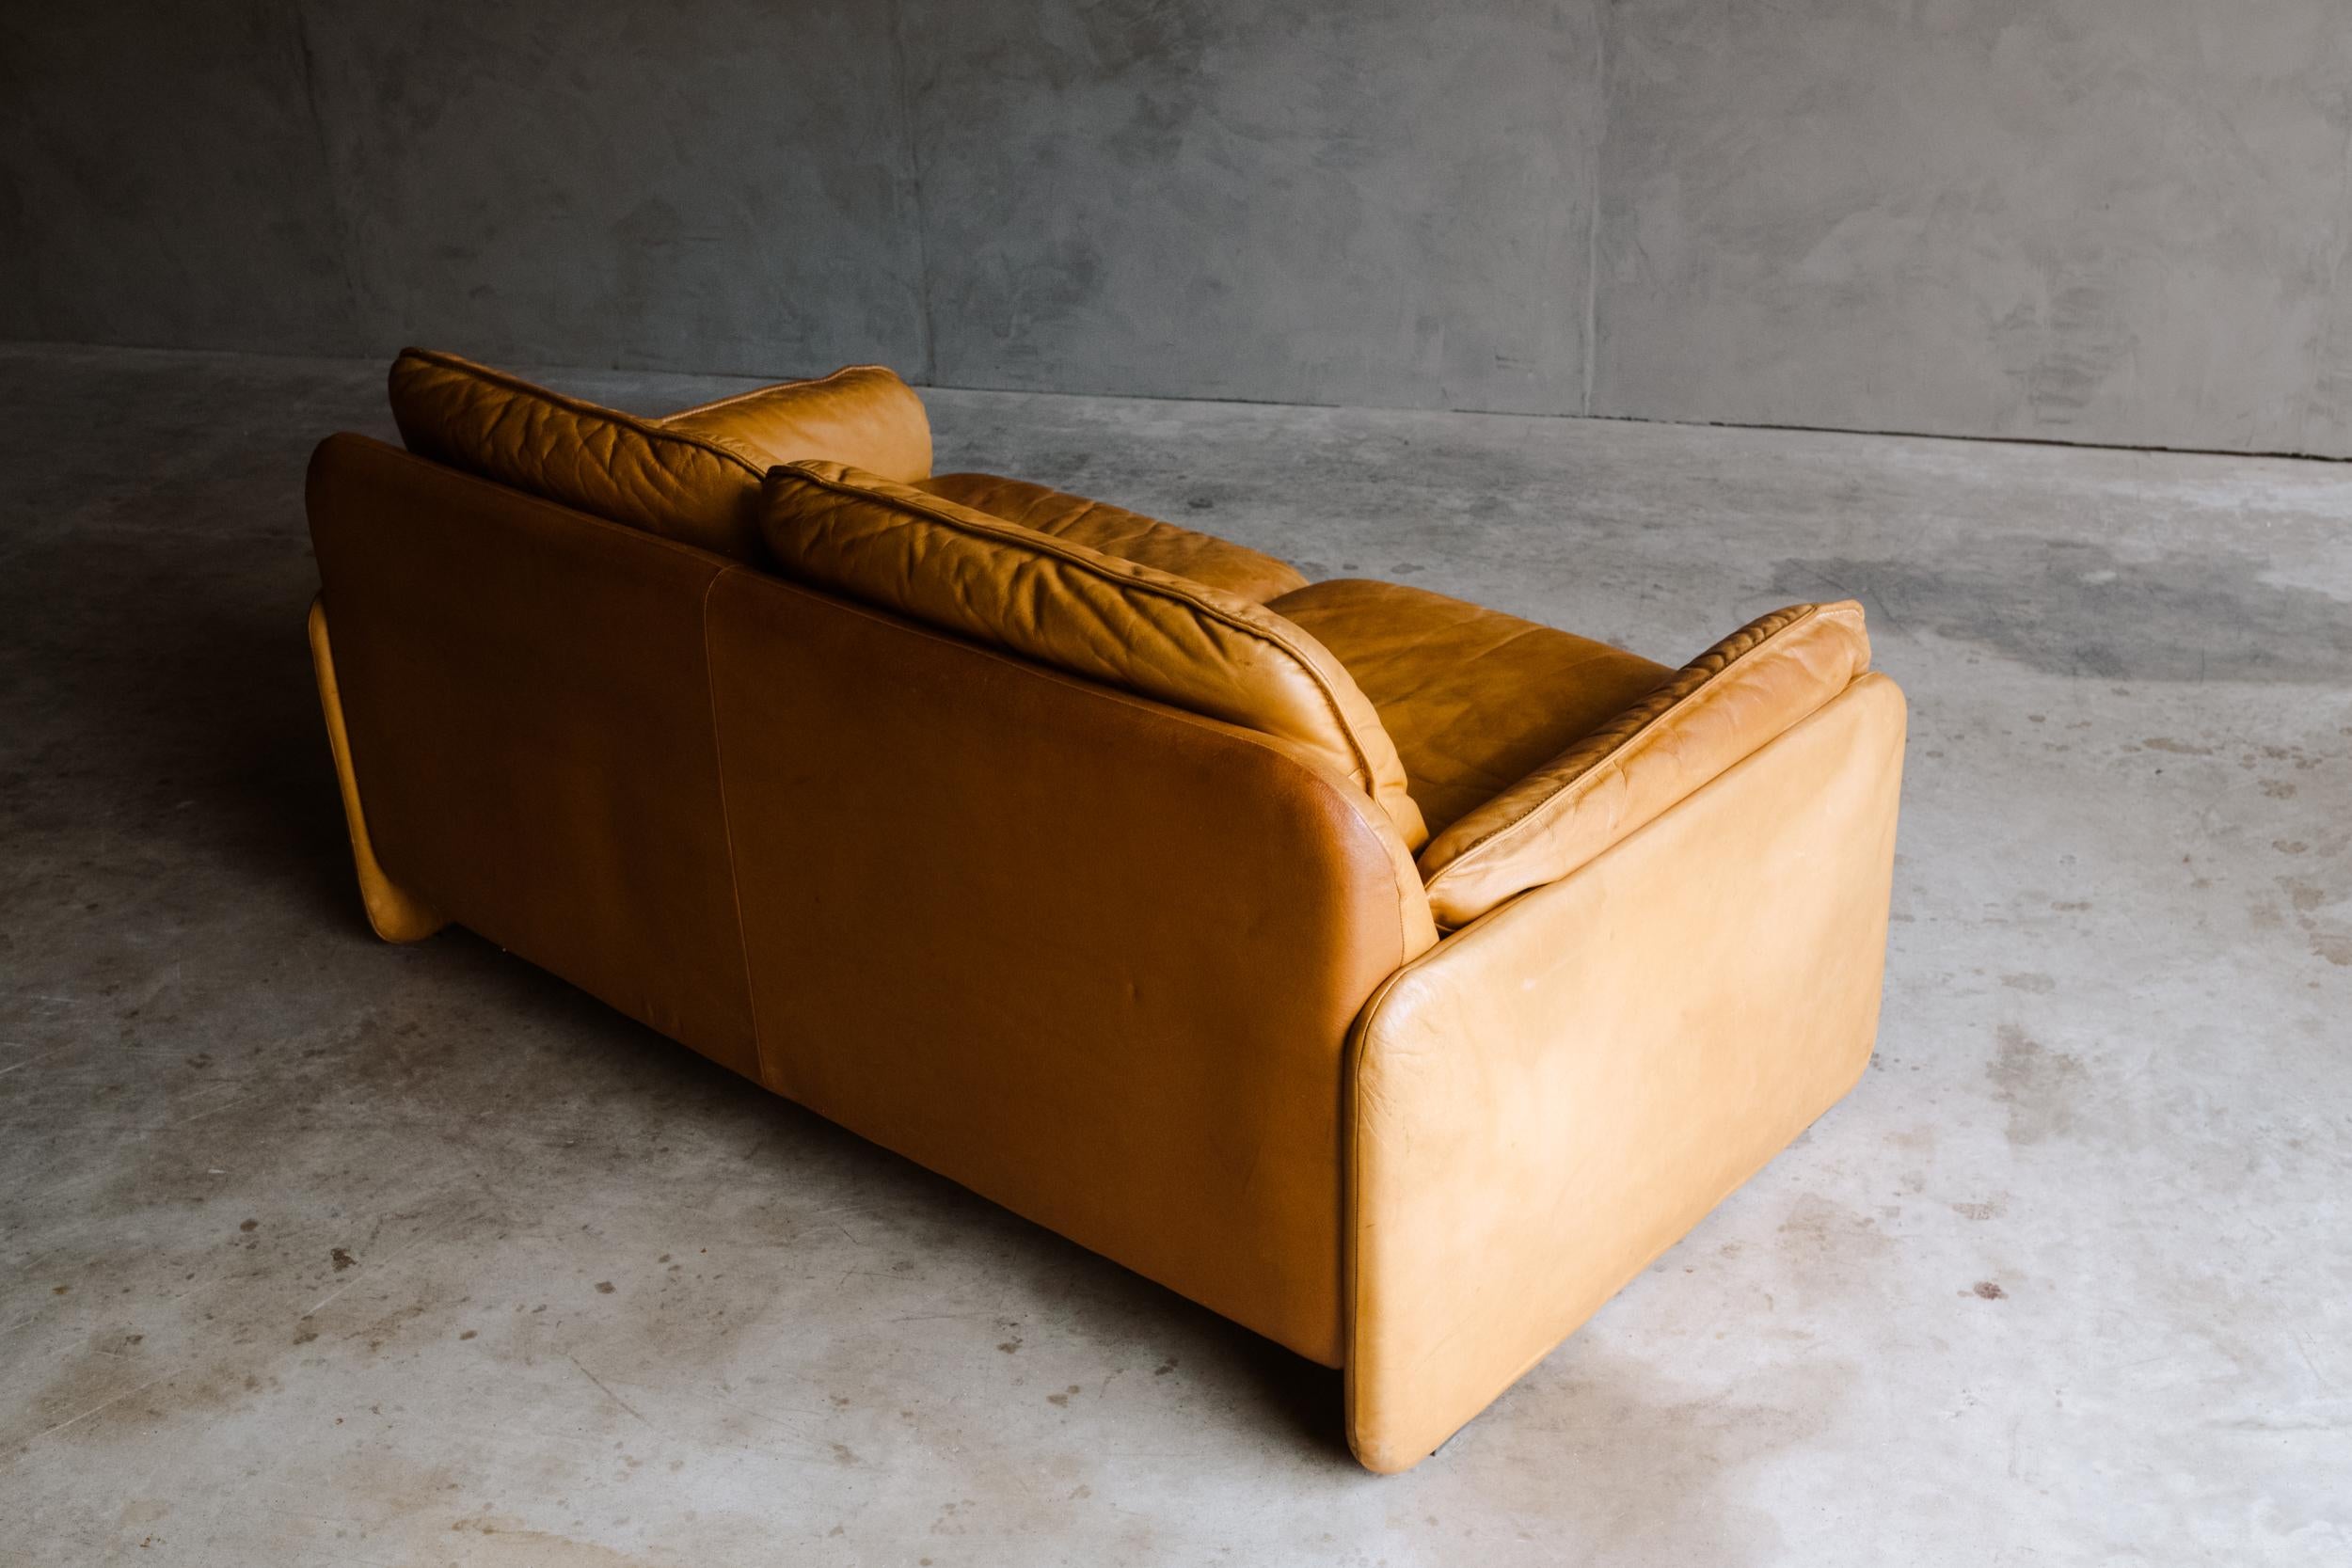 Late 20th Century Vintage Leather De Sede Sofa from Switzerland, Circa 1970